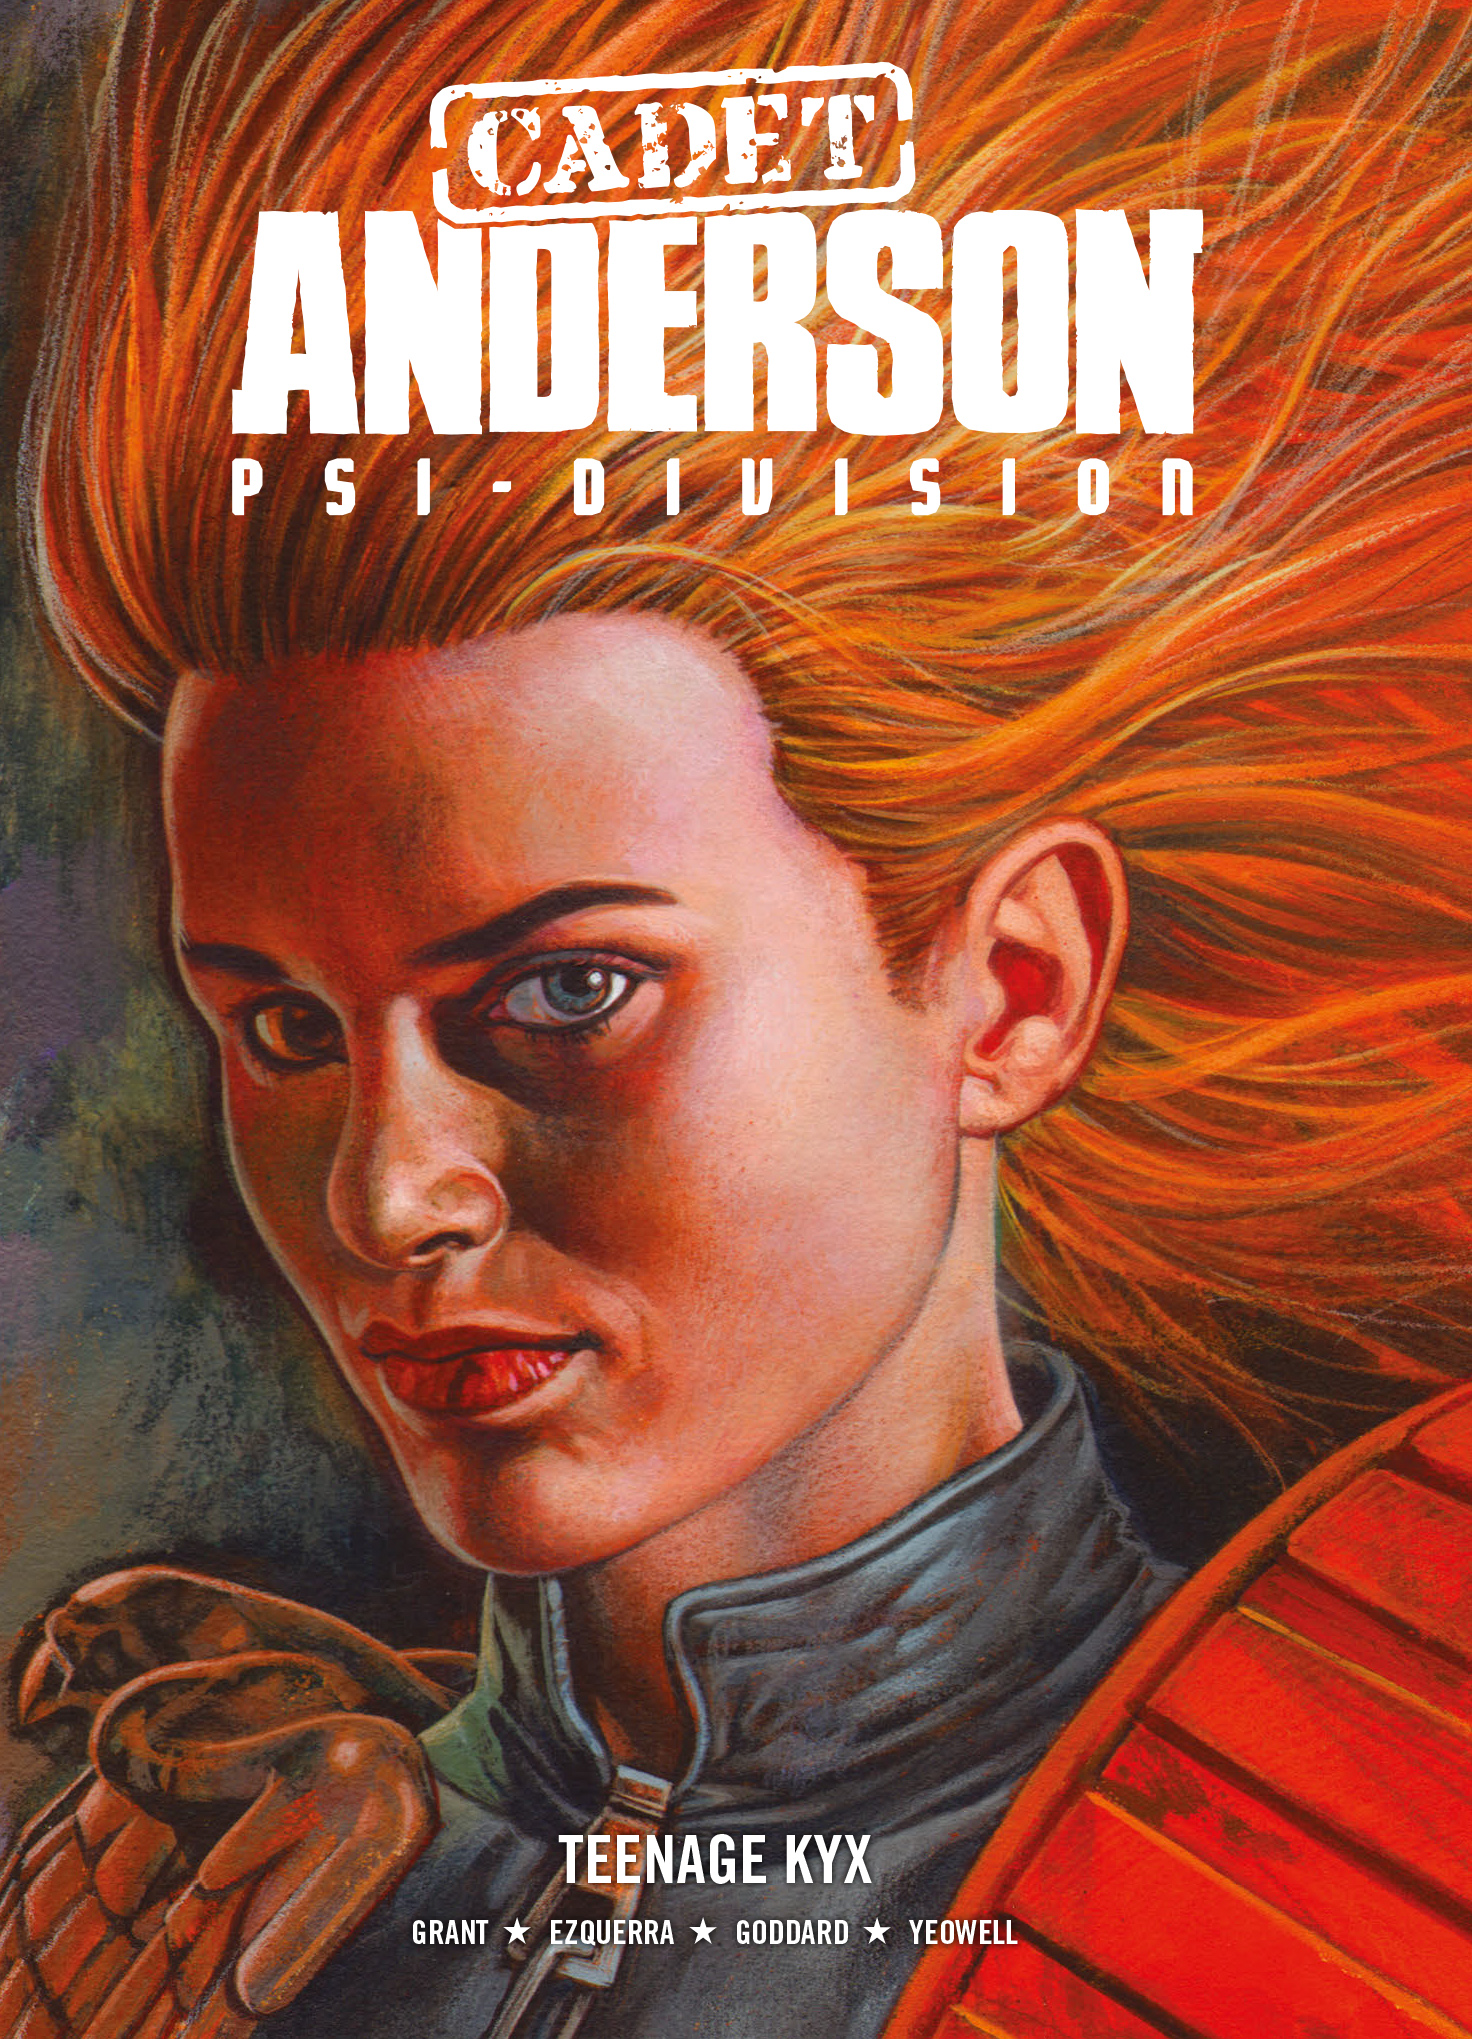 Read online Cadet Anderson: Teenage Kyx comic -  Issue # TPB - 1